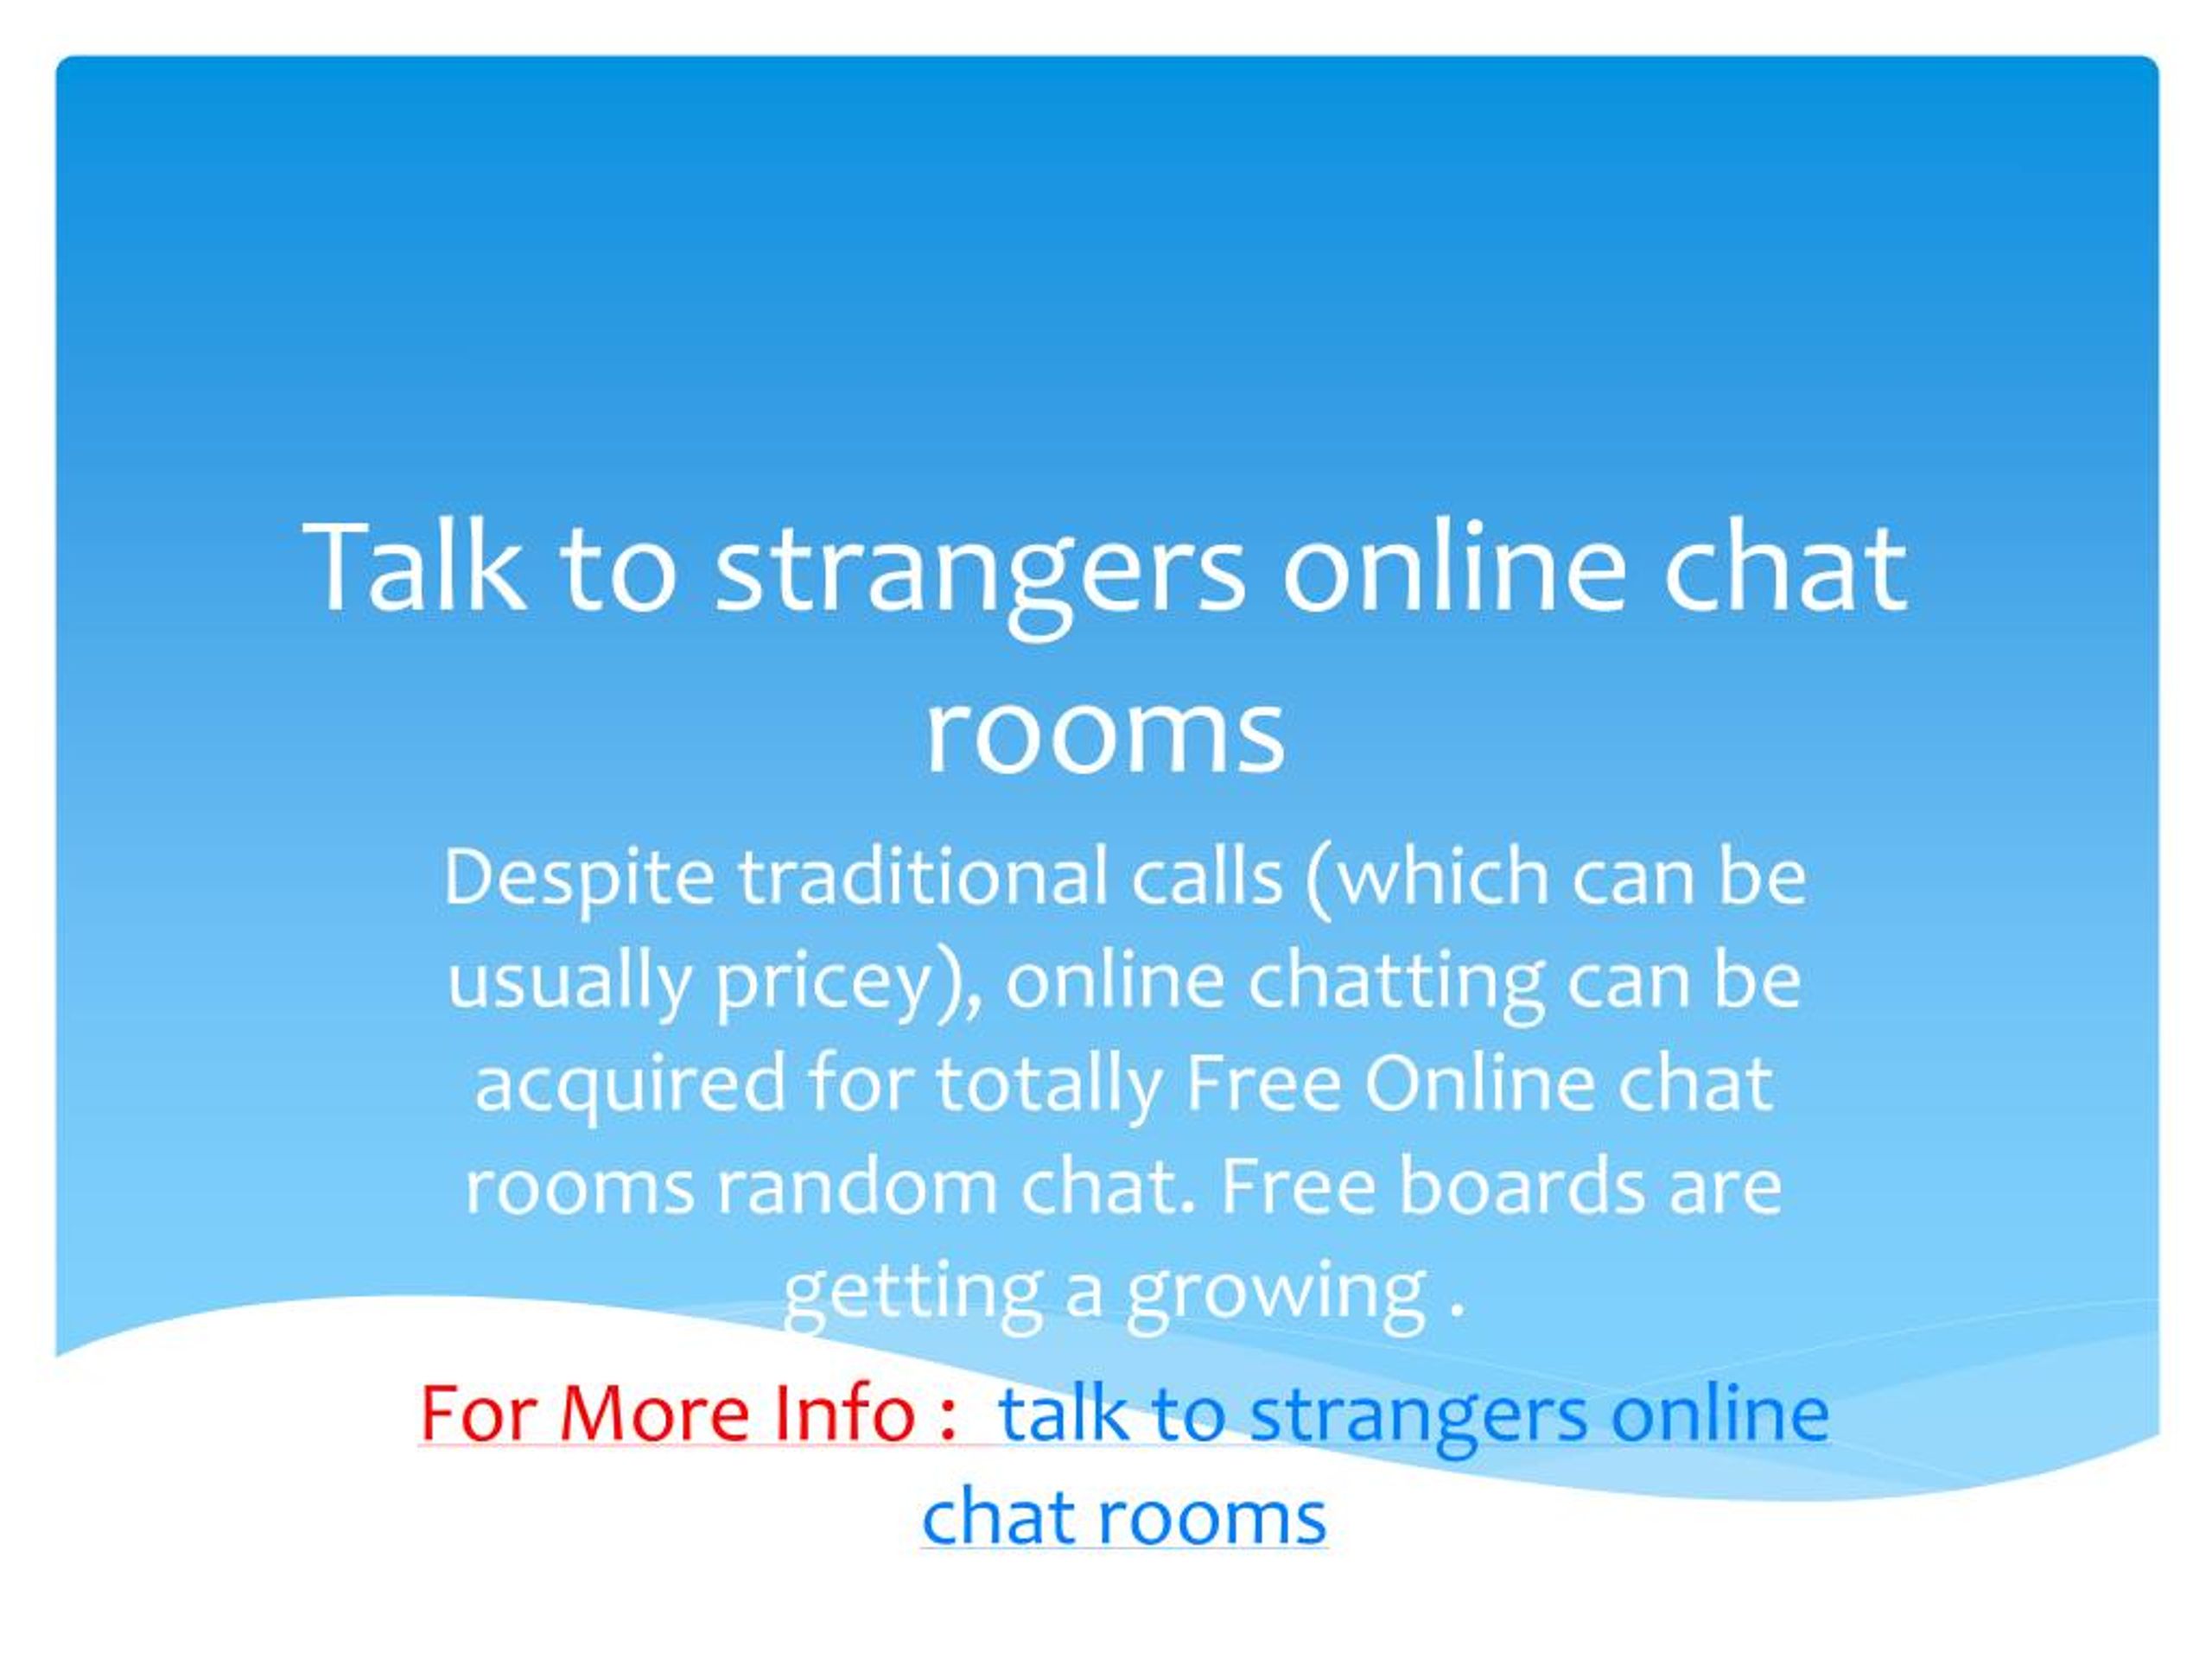 Chat and talk with random strangers